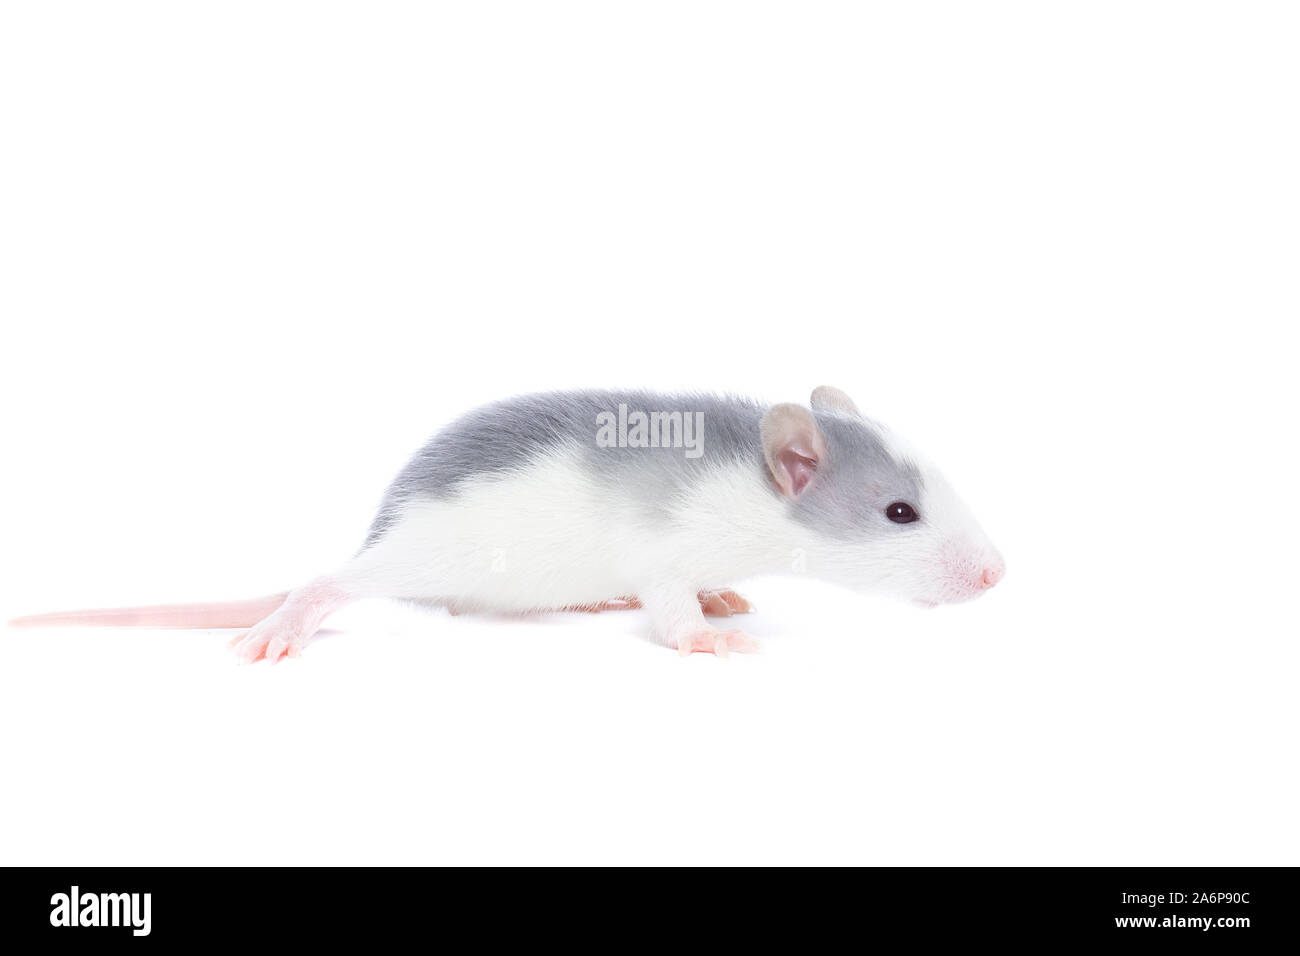 rat close-up isolated on white background, rat on new year and Christmas Stock Photo